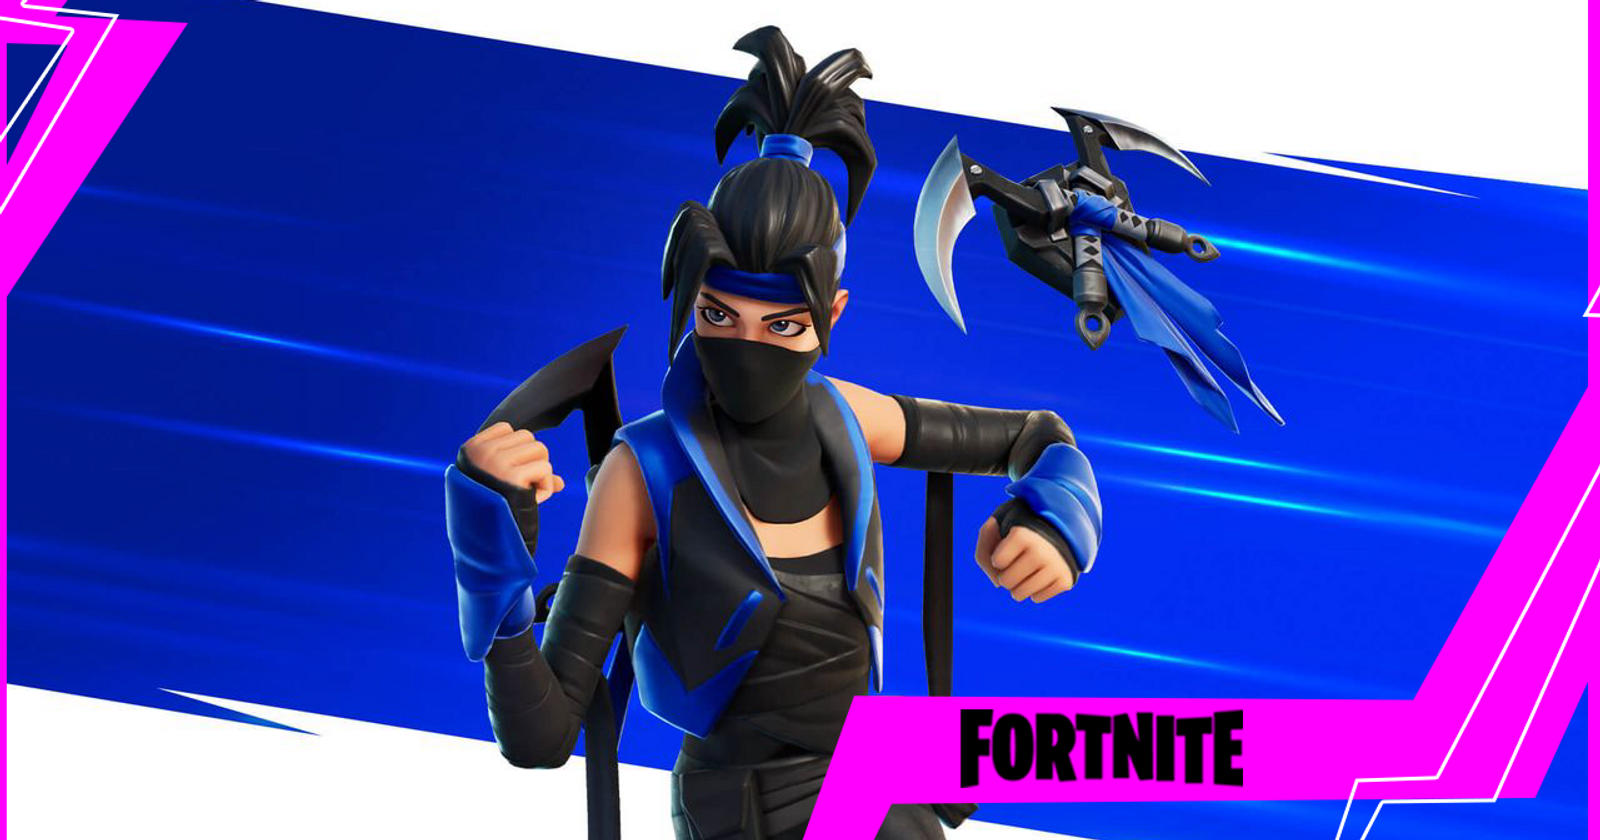 Fortnite Generations Cup: Exclusive Skin For PS4 and PS5 Players, Details,  Prize Pool, Format